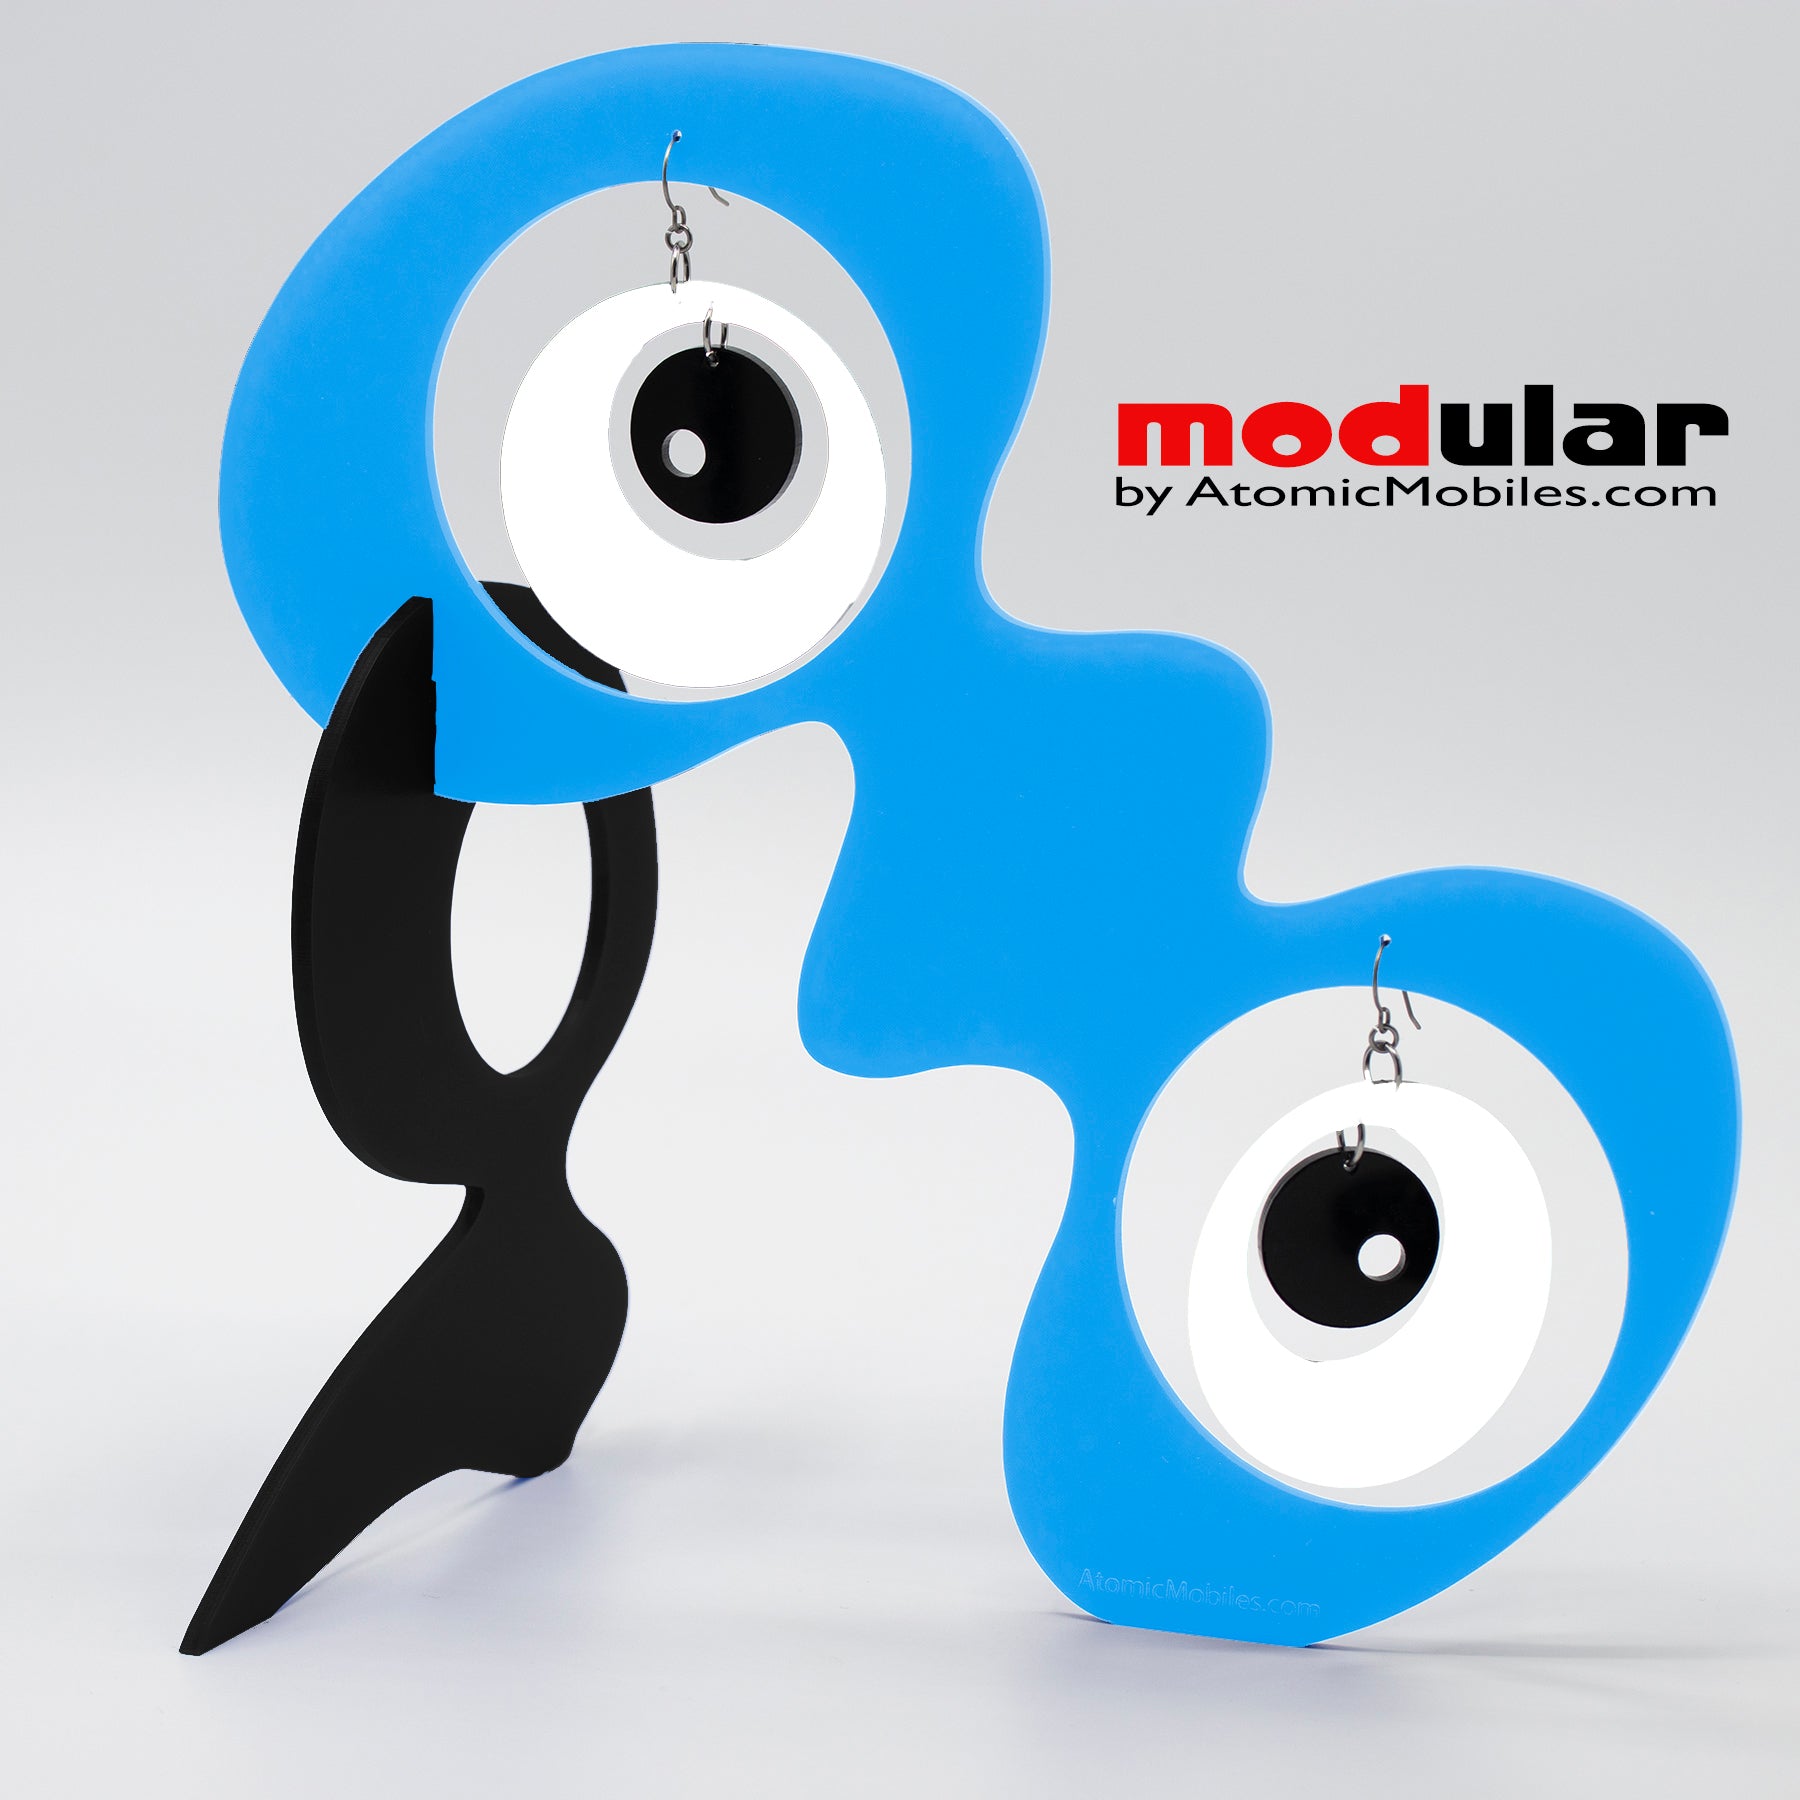 Handmade Groovy style earrings and stabile kinetic modern art sculpture in Blue Black and White by AtomicMobiles.com